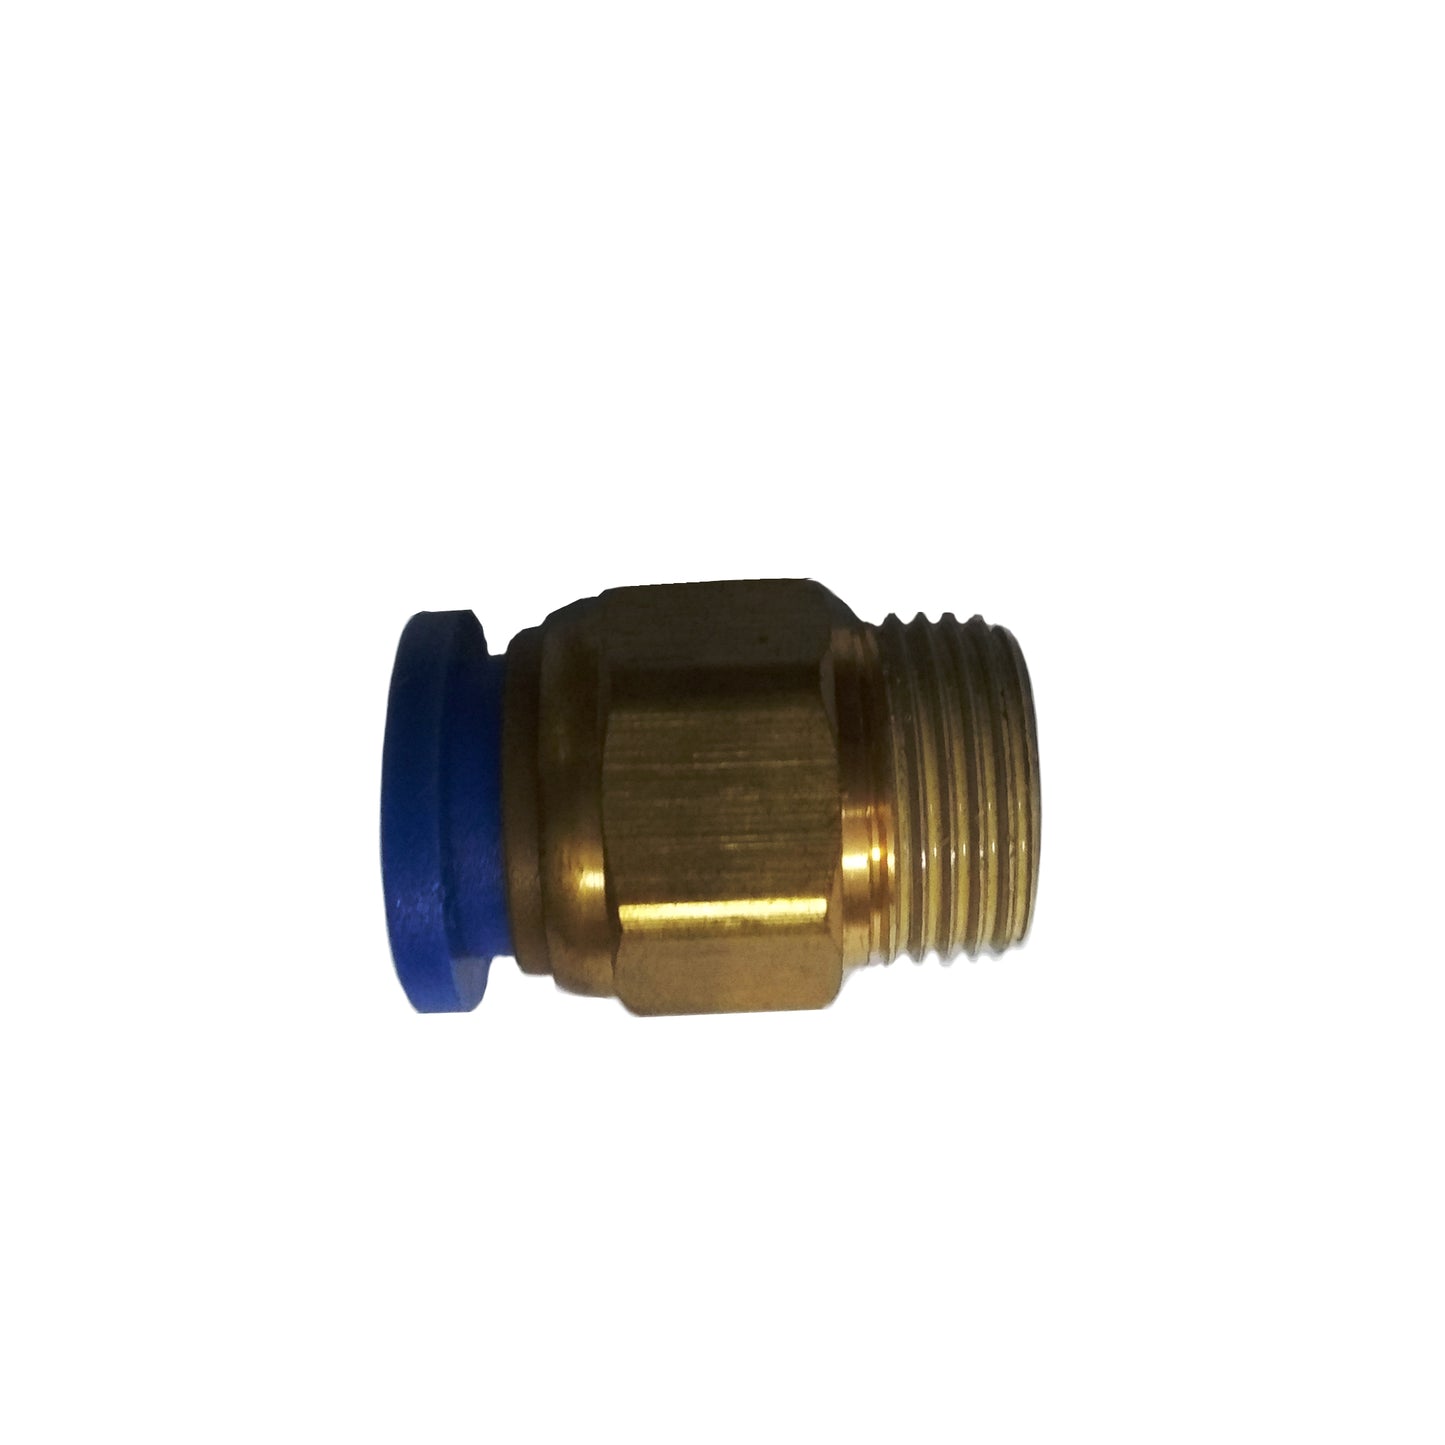 Hose Adaptor for Hose Assembly for PDS-12 Wall Cavity Dryer